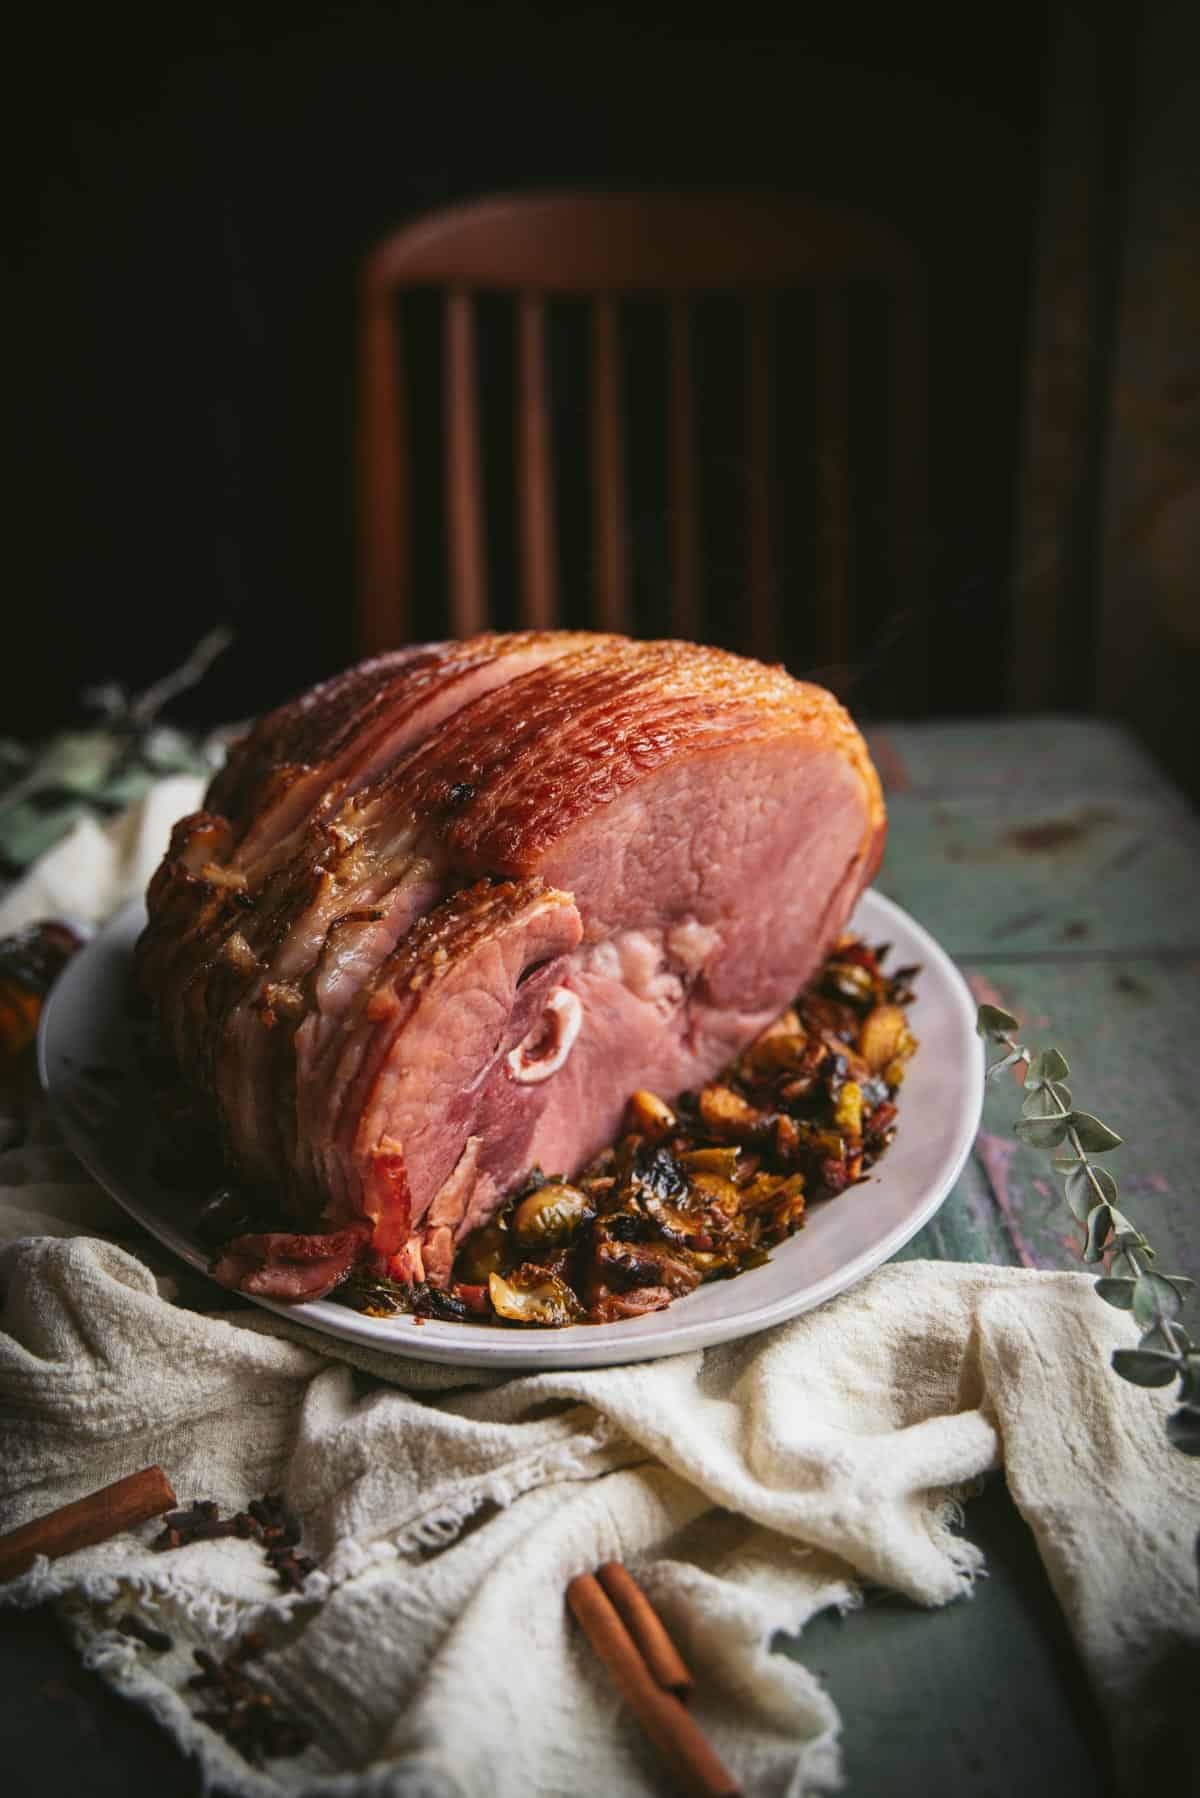 The finished brown sugar bourbon glazed ham is sitting on the table, on a white plate, on a bed of crispy sprouts.